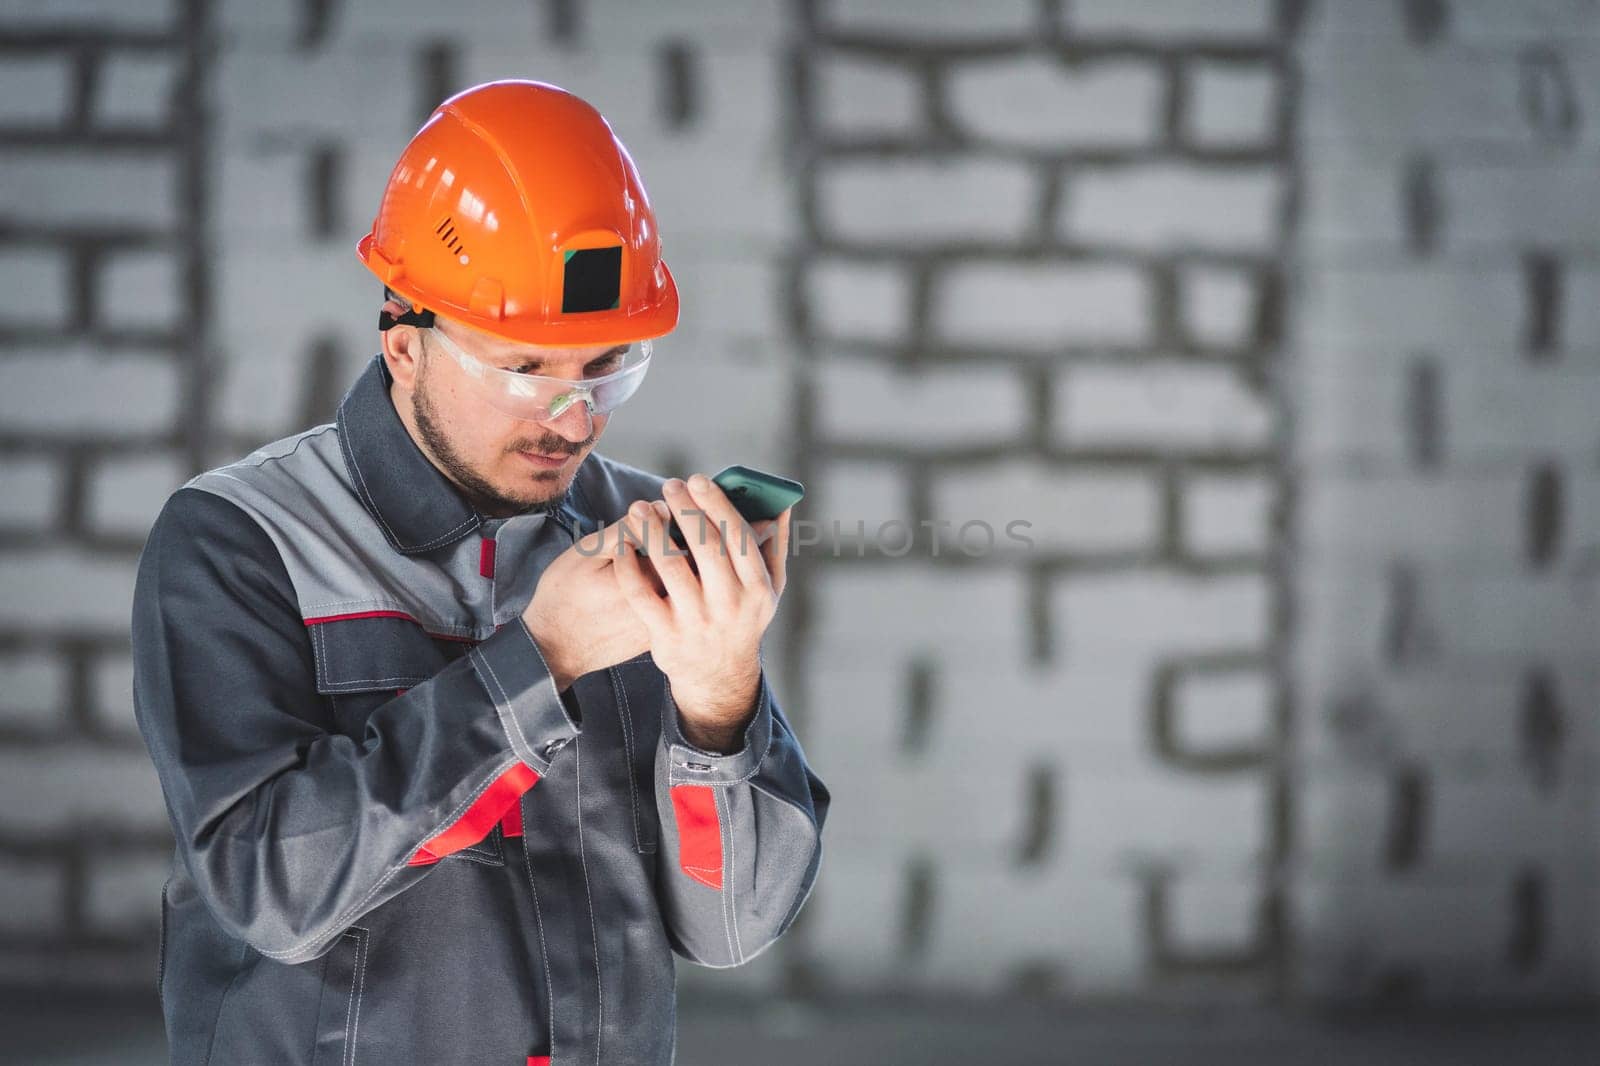 Caucasian male builder in overalls and helmet uses smartphone as radio for communication at construction site.